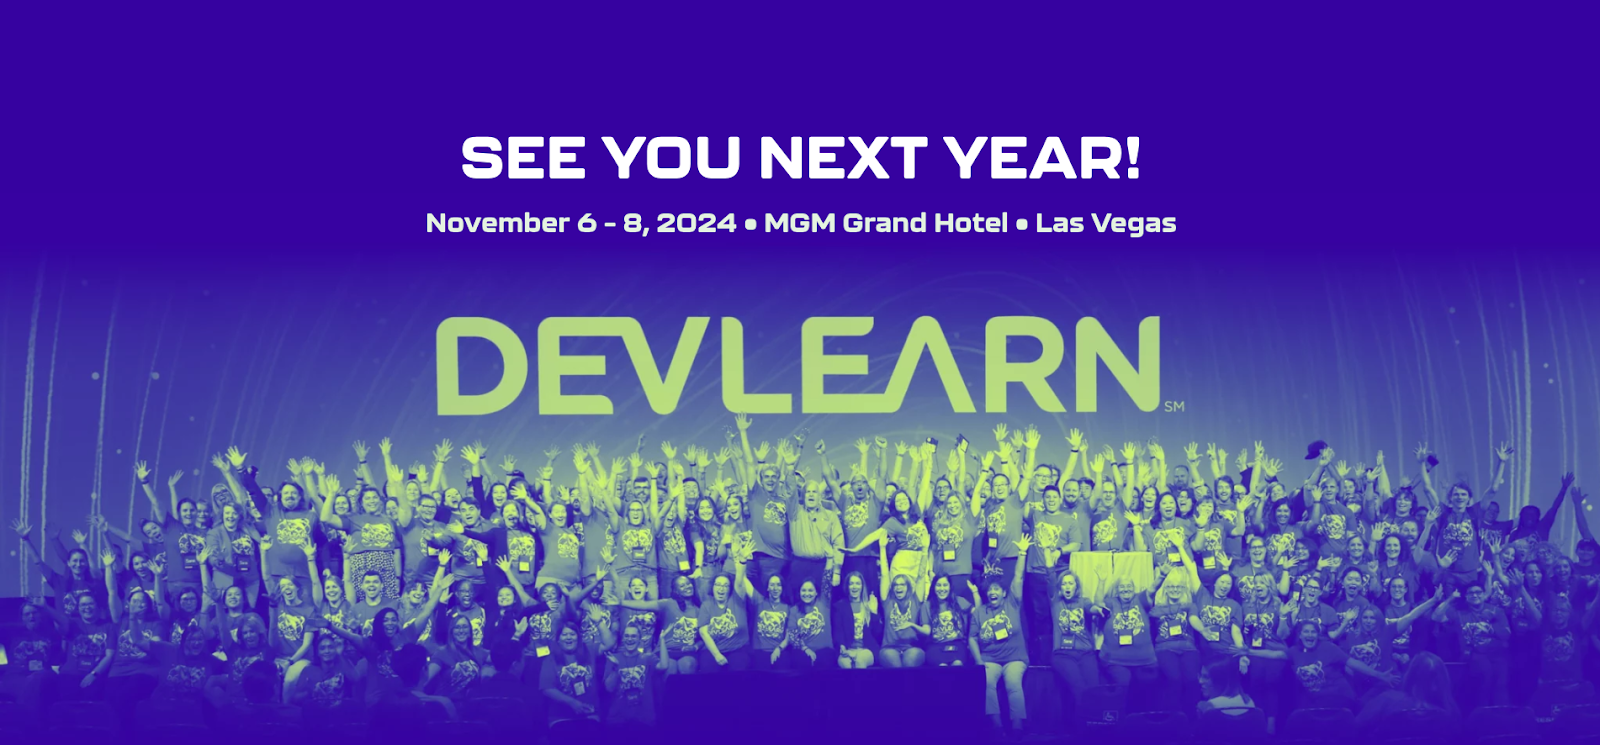 DevLearn Conference & Expo is one of North America's leading L&D conferences.